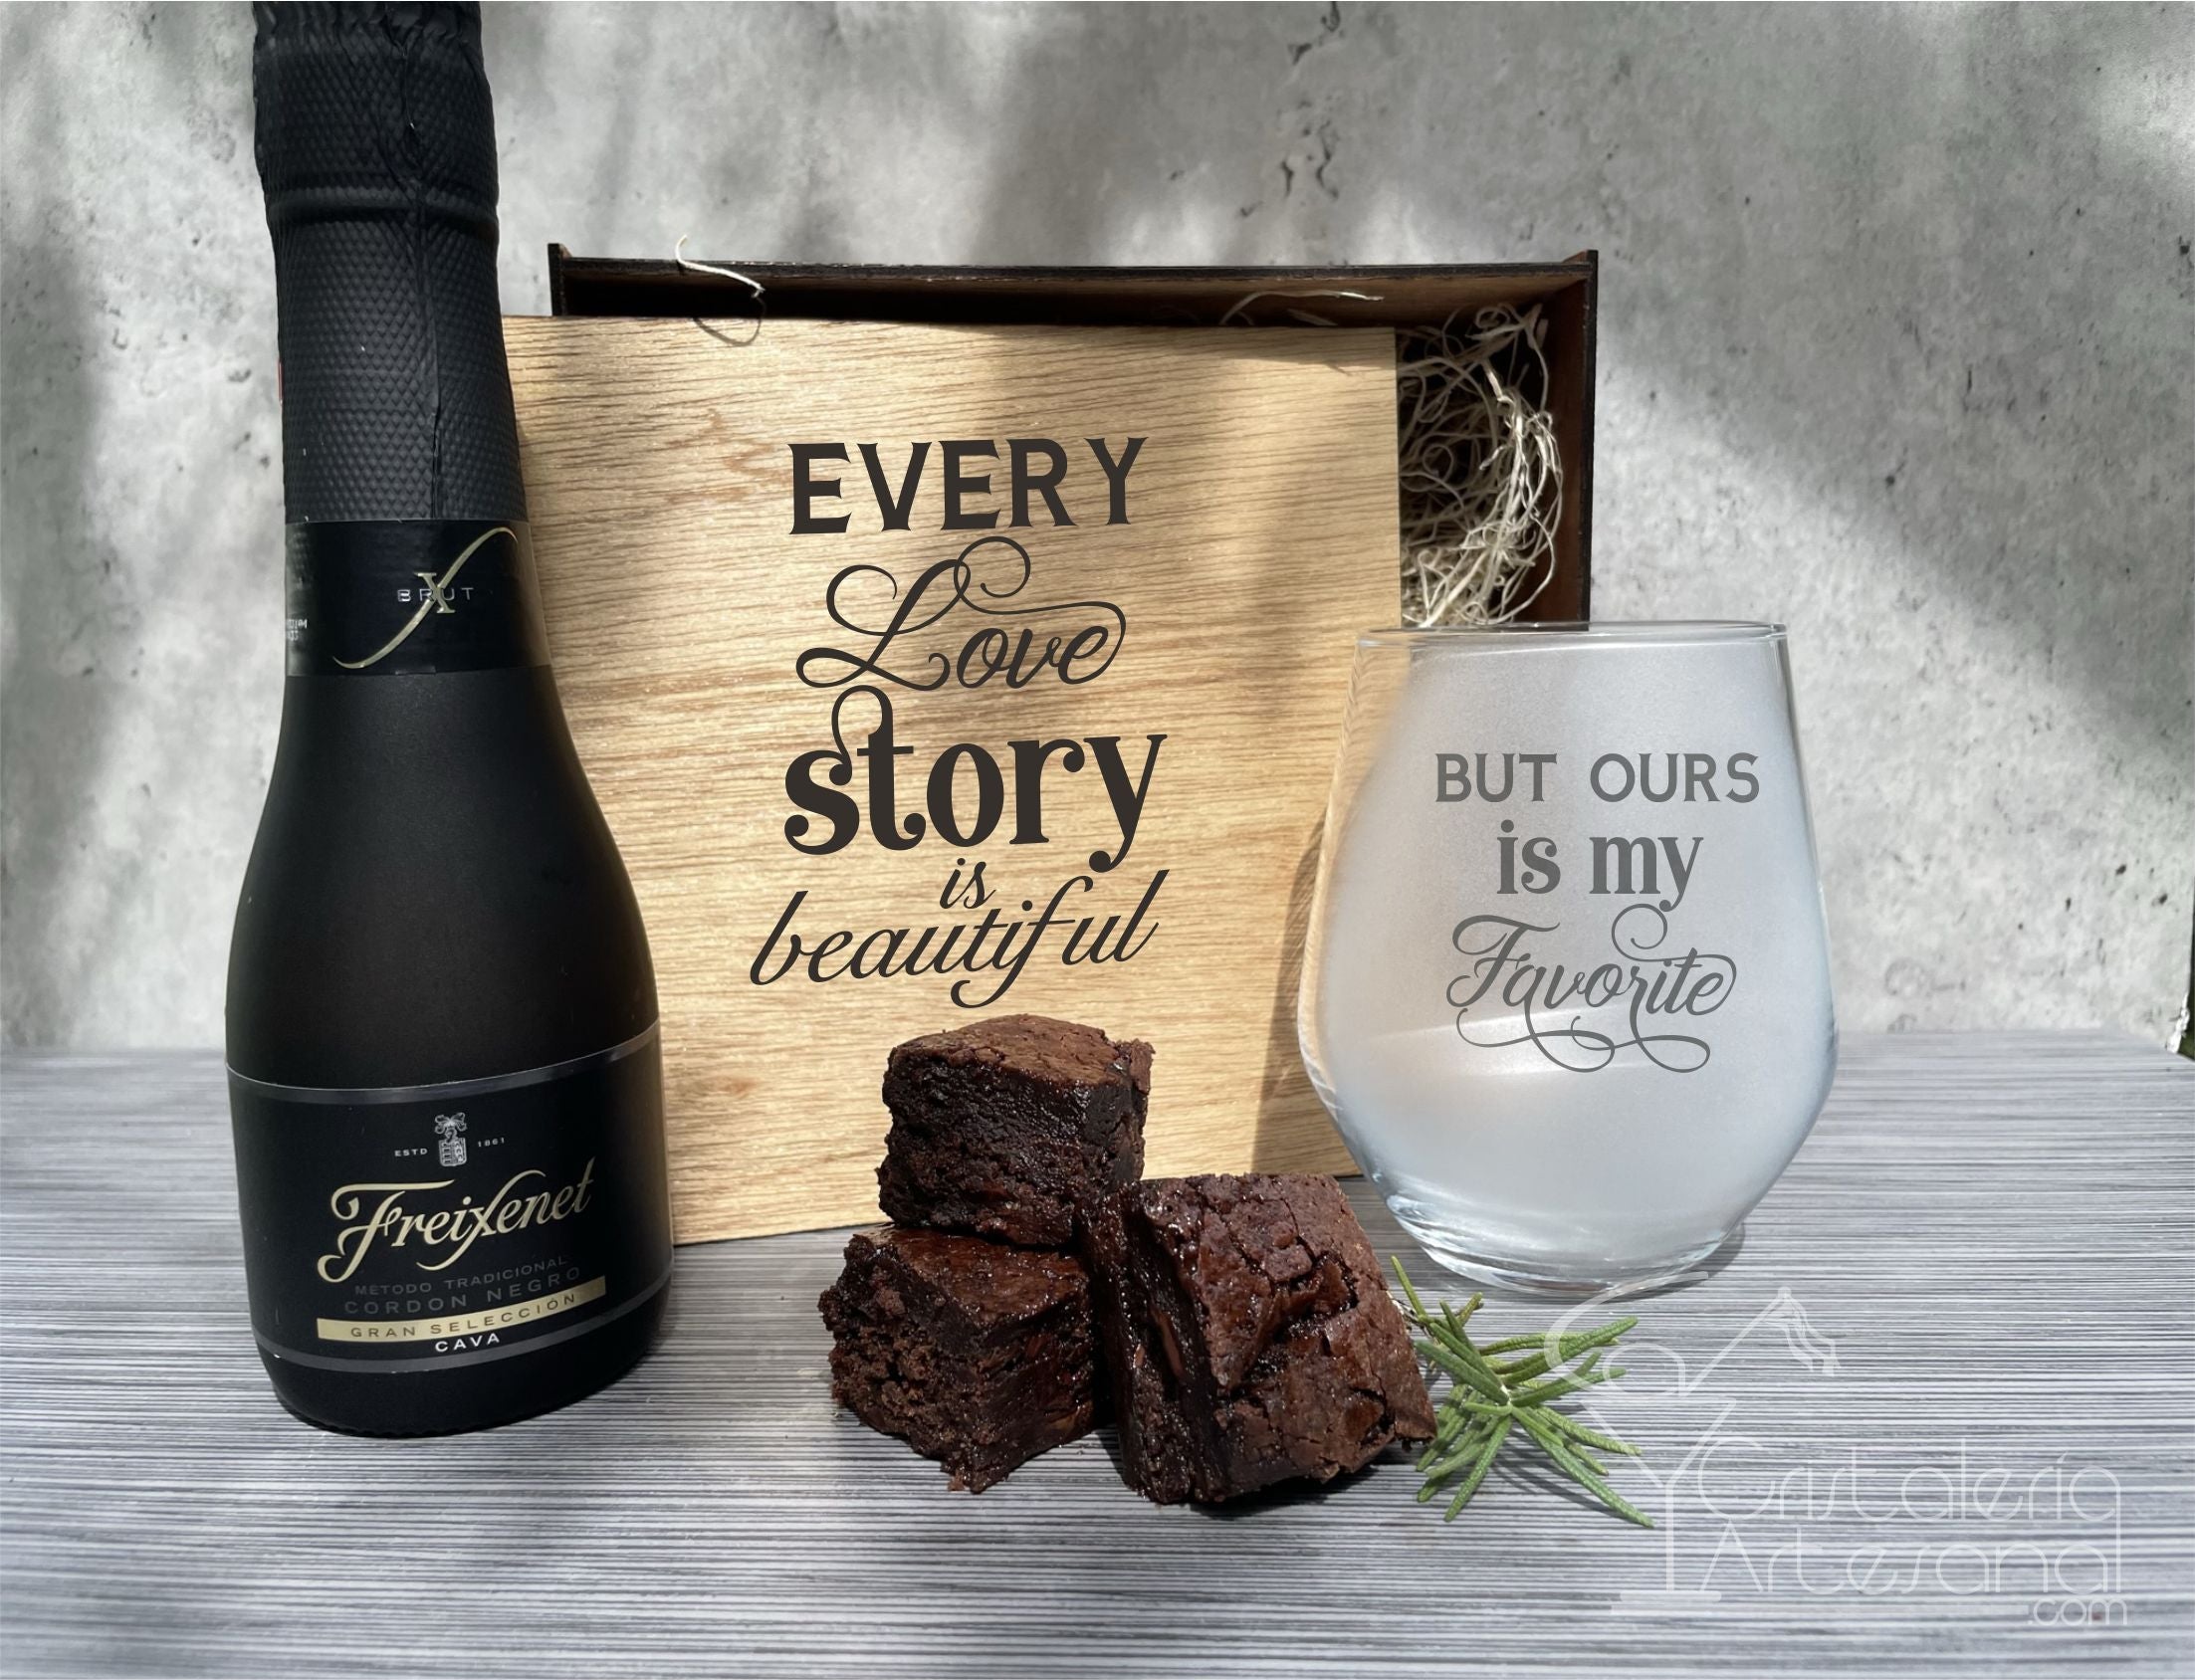 Juego Stemless Glass "But ours is my Favorite", caja en madera, Brownies y Cava